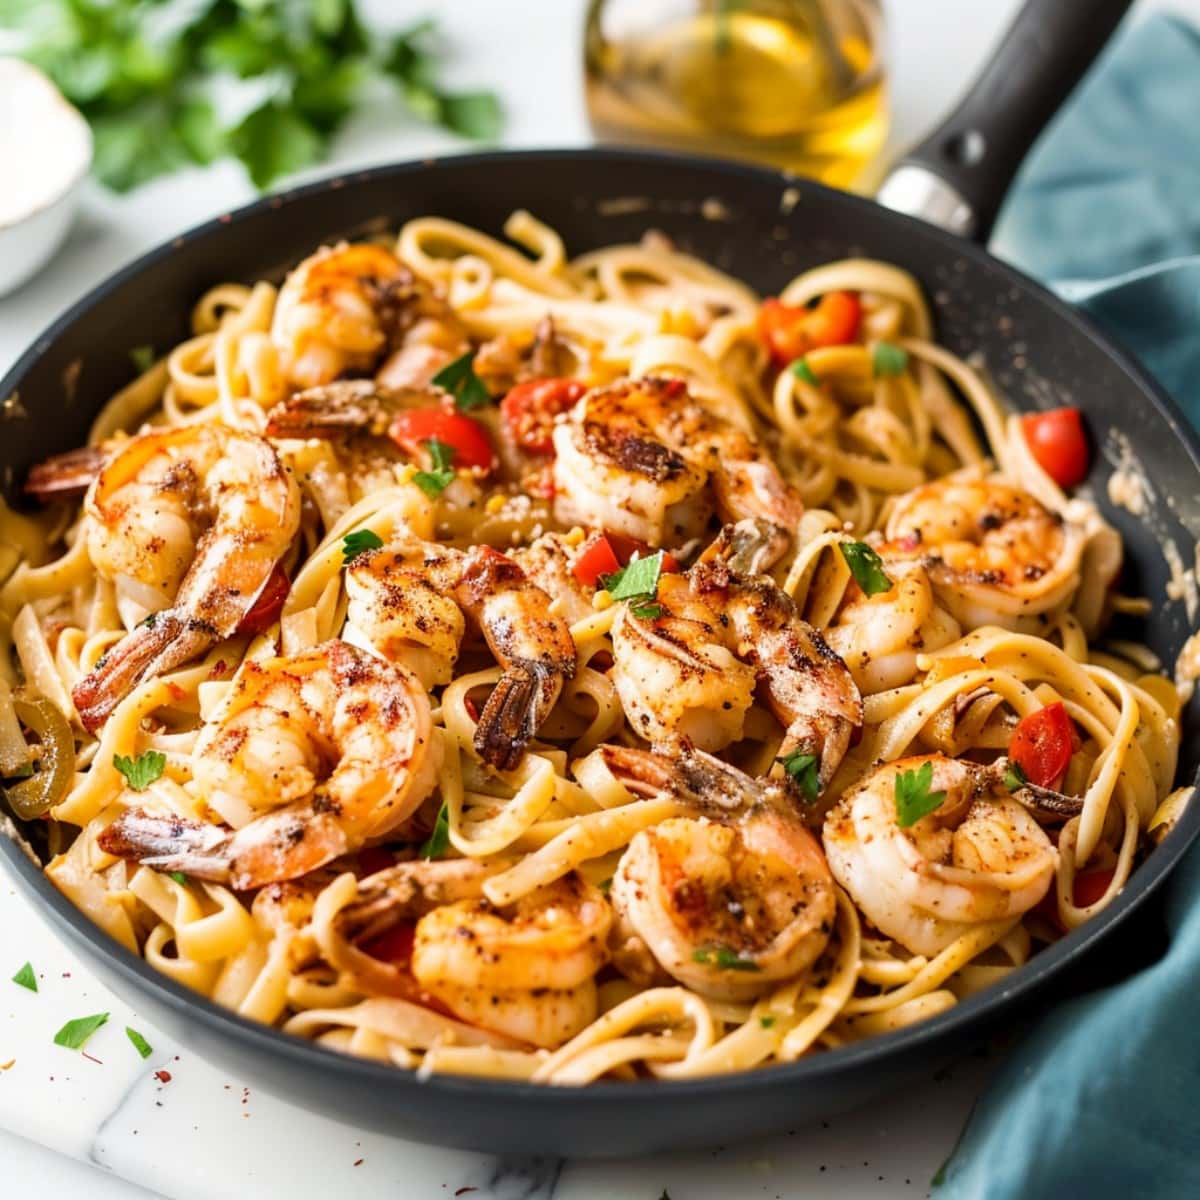 A black skillet filled with Cajun shrimp pasta infused with salt and pepper, garnished with fresh parsley